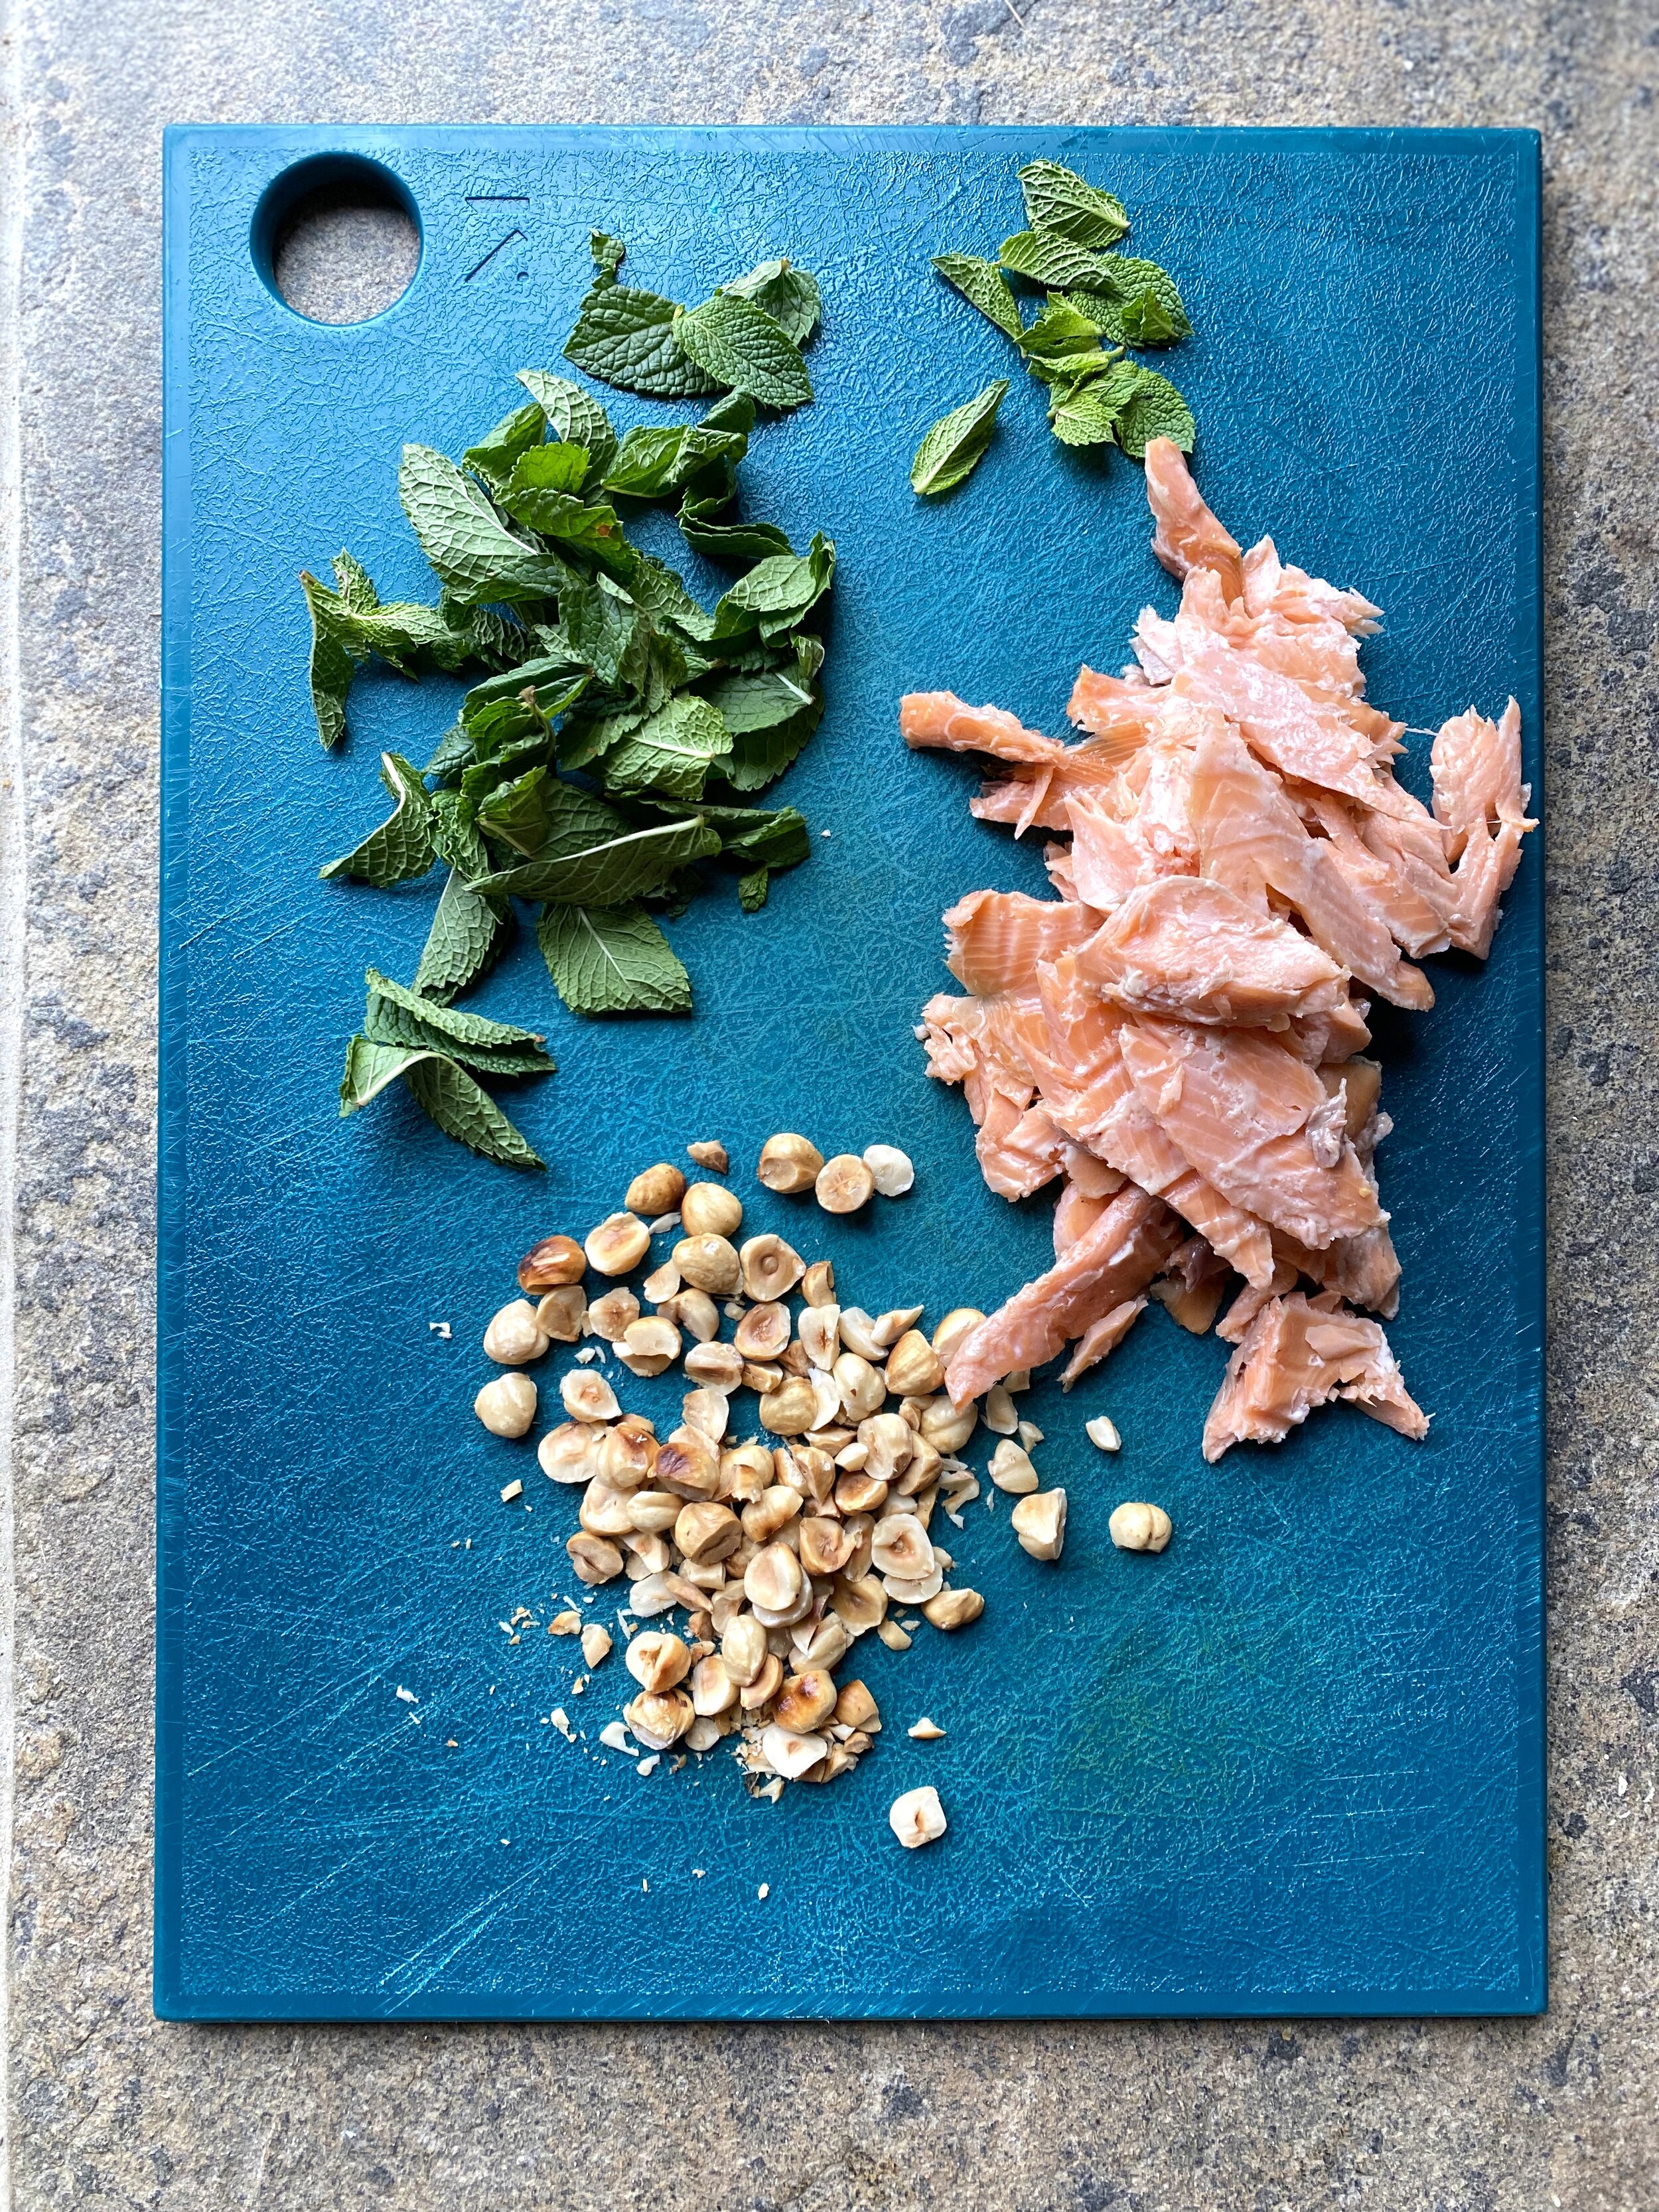 Ingredients for smoked trout salad